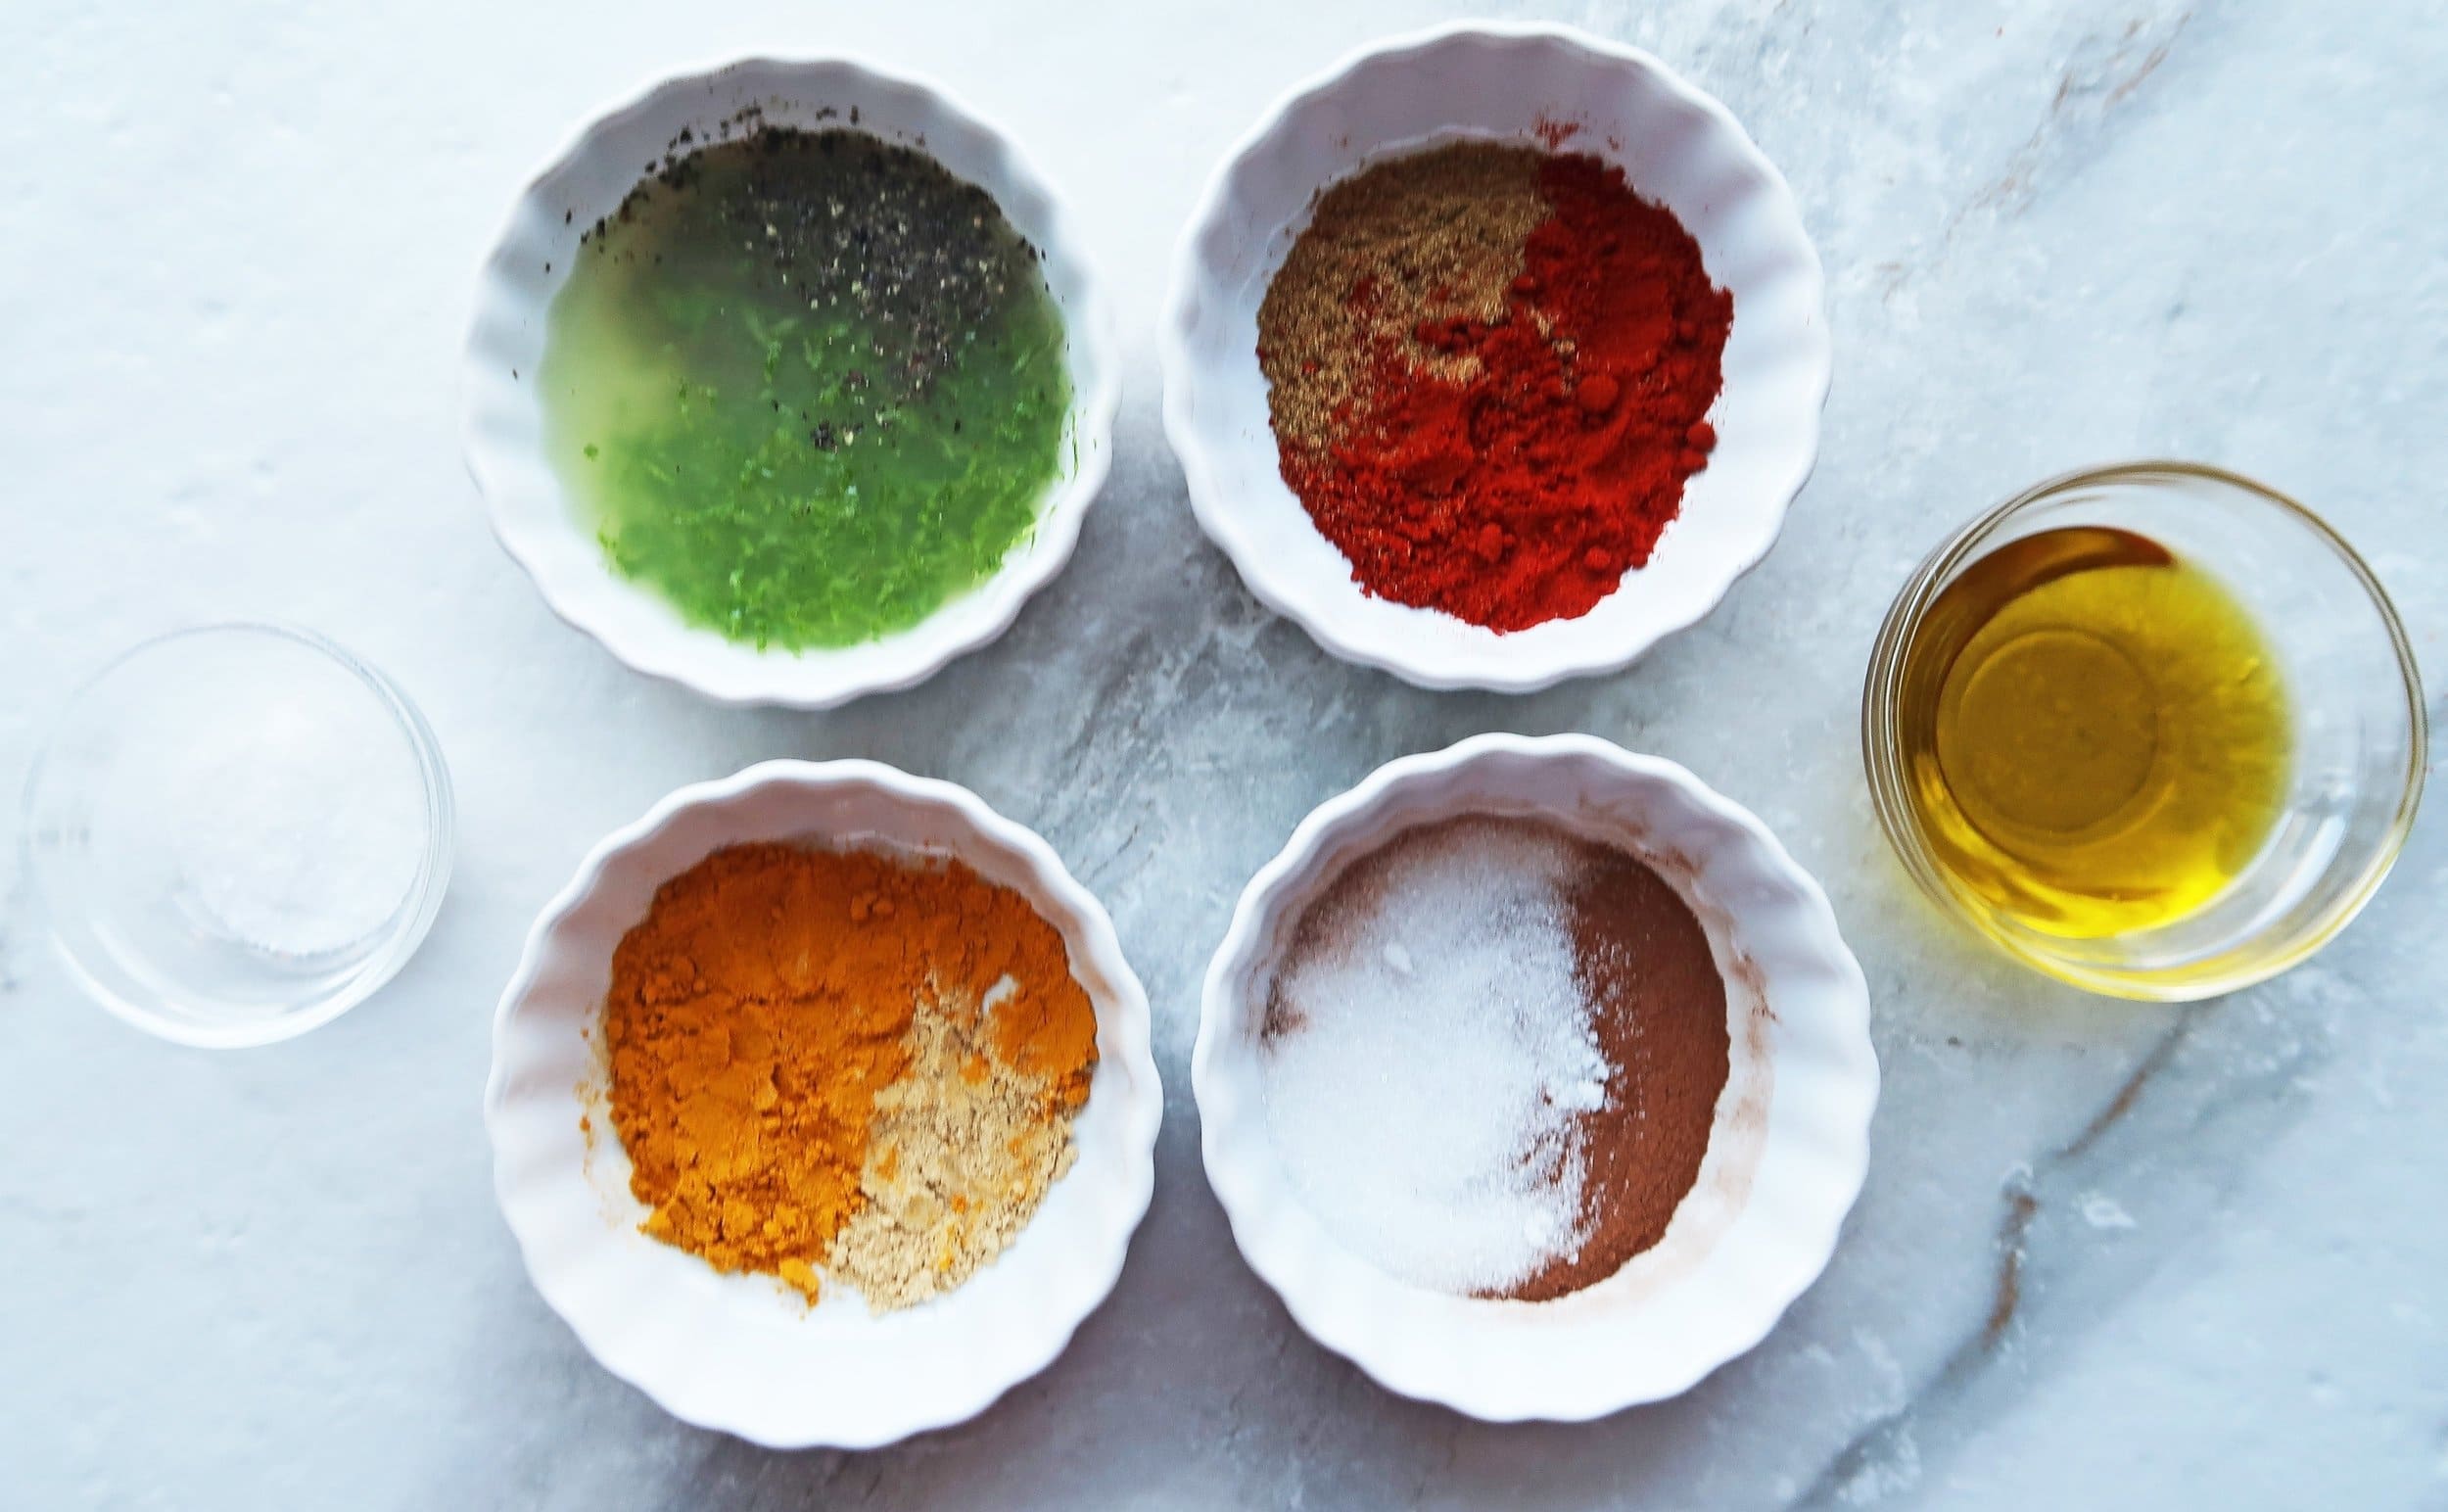 Fours of different spice combinations.